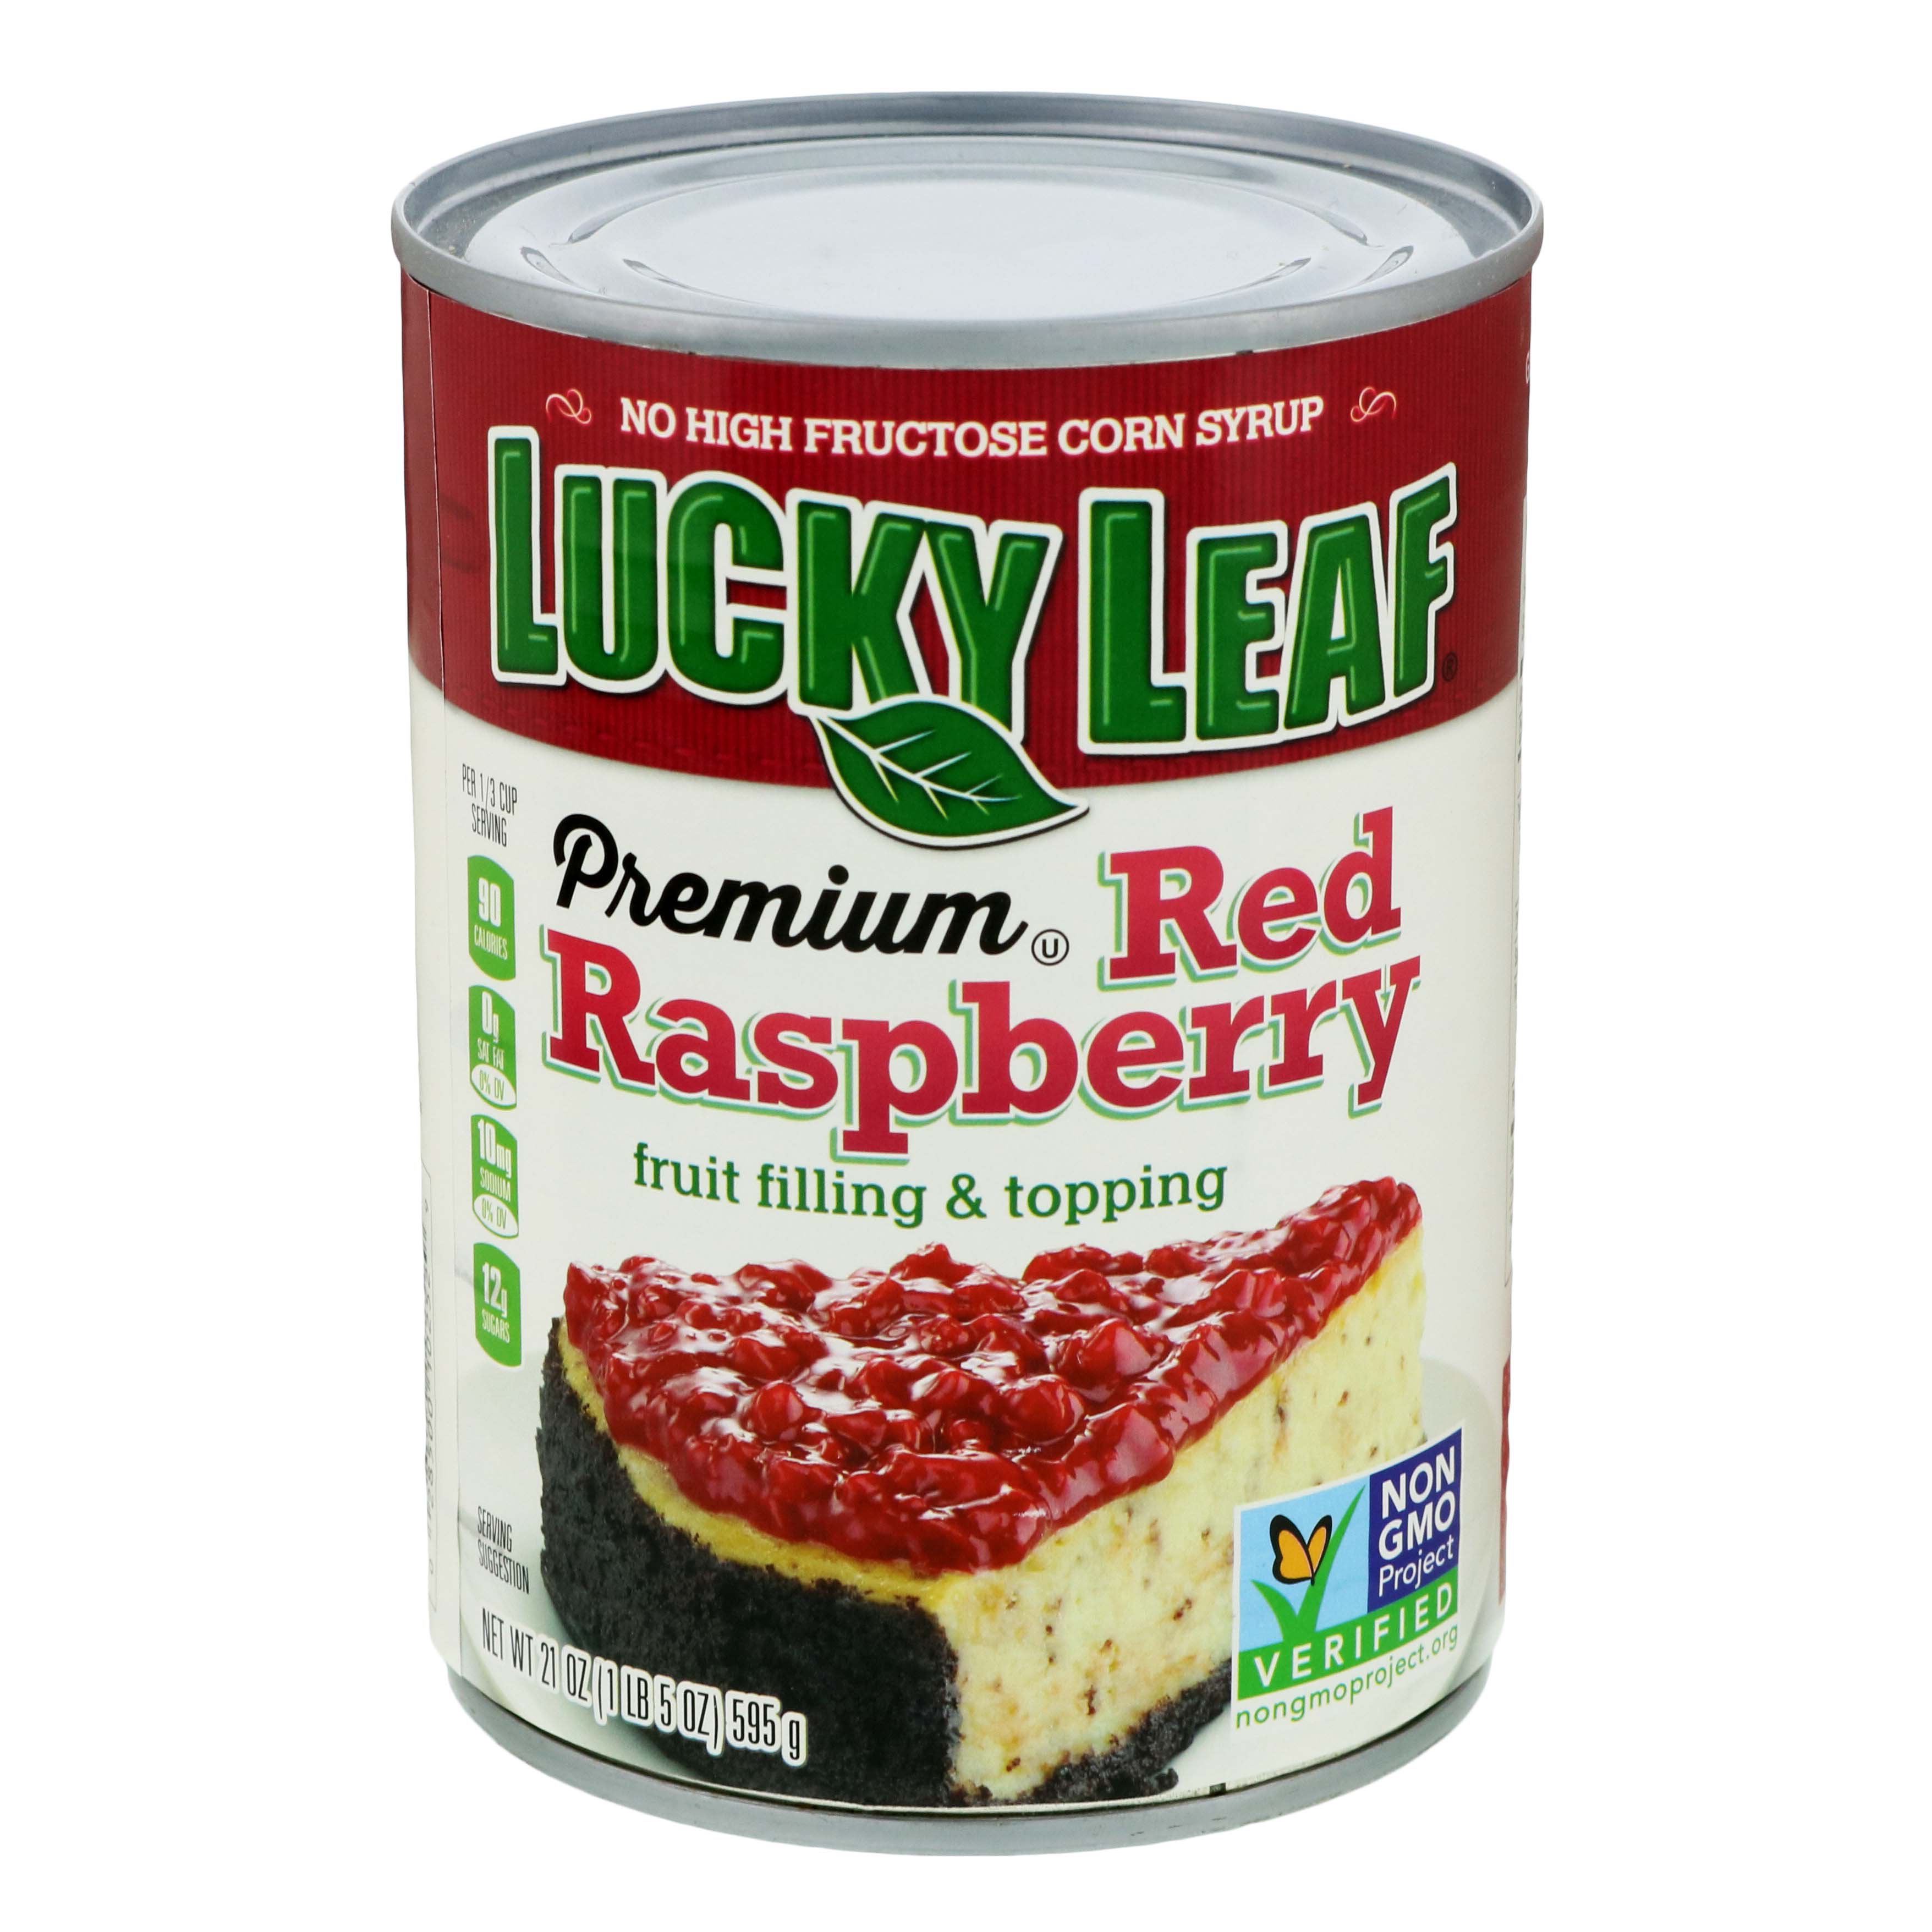 Lucky Leaf Premium Red Raspberry Pie Filling And Topping Shop Pie Filling At H E B